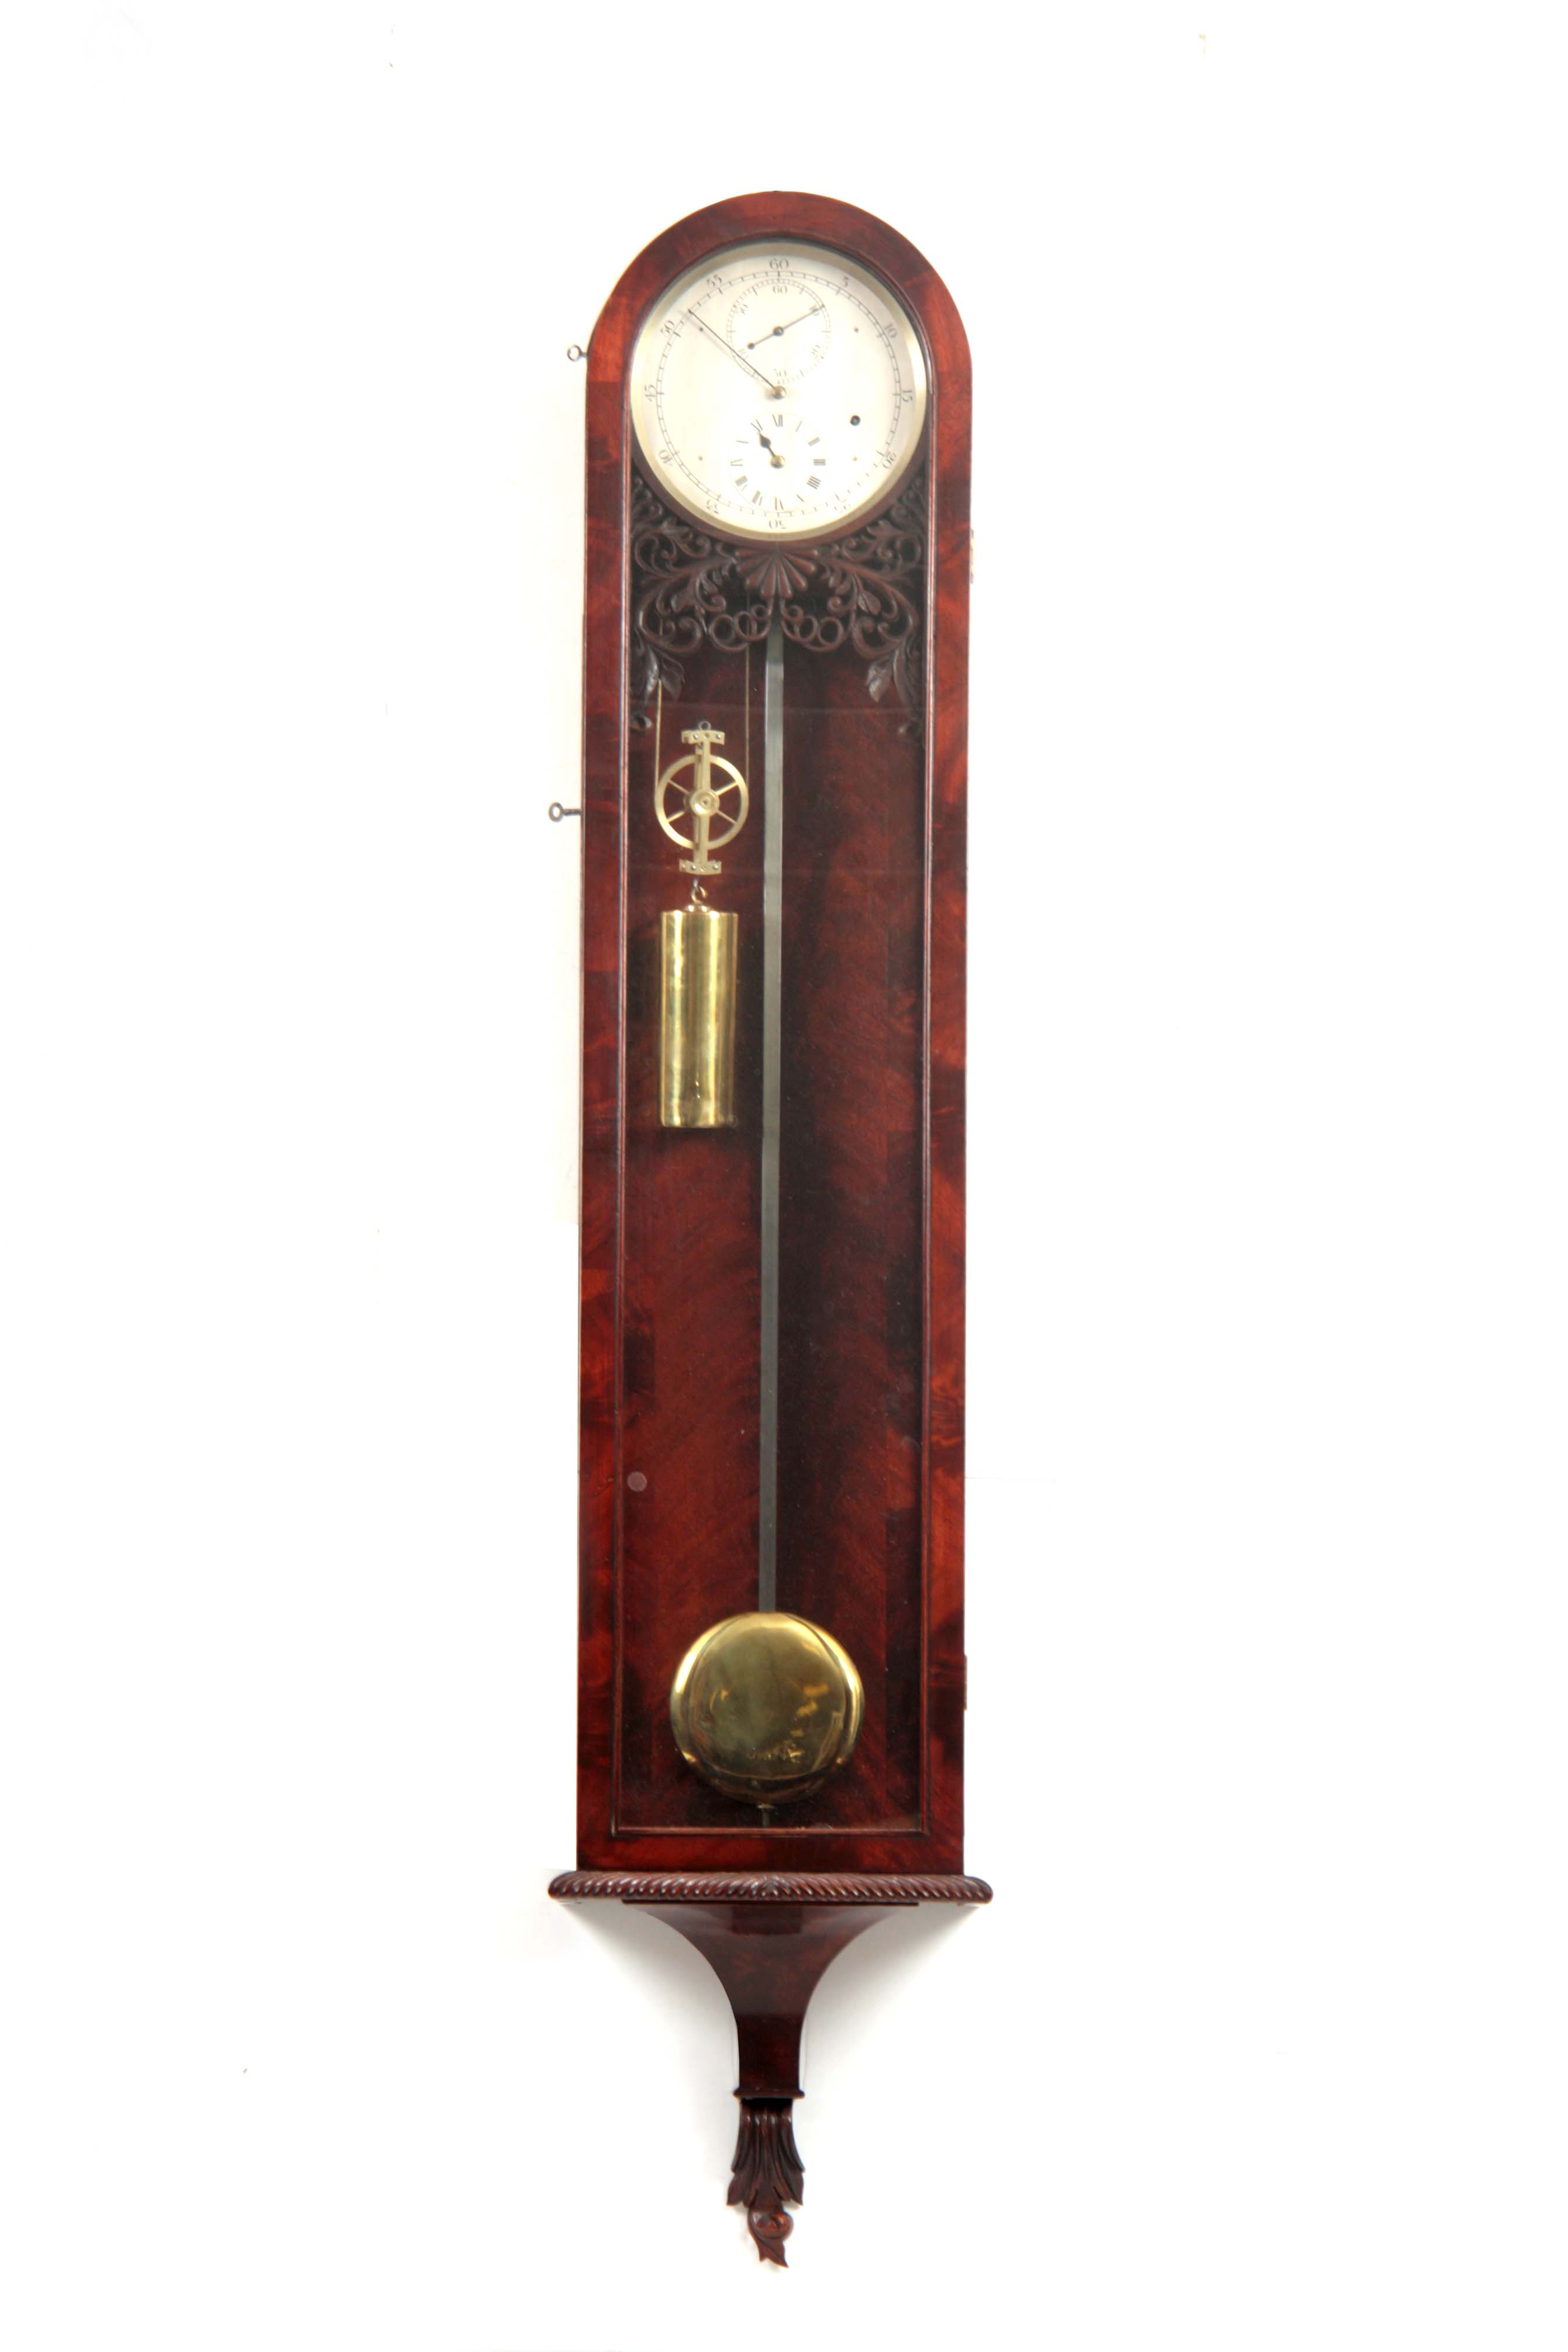 A GOOD QUALITY MID 20TH CENTURY FIGURED MAHOGANY REGENCY STYLE REGULATOR WALL CLOCK the arched top